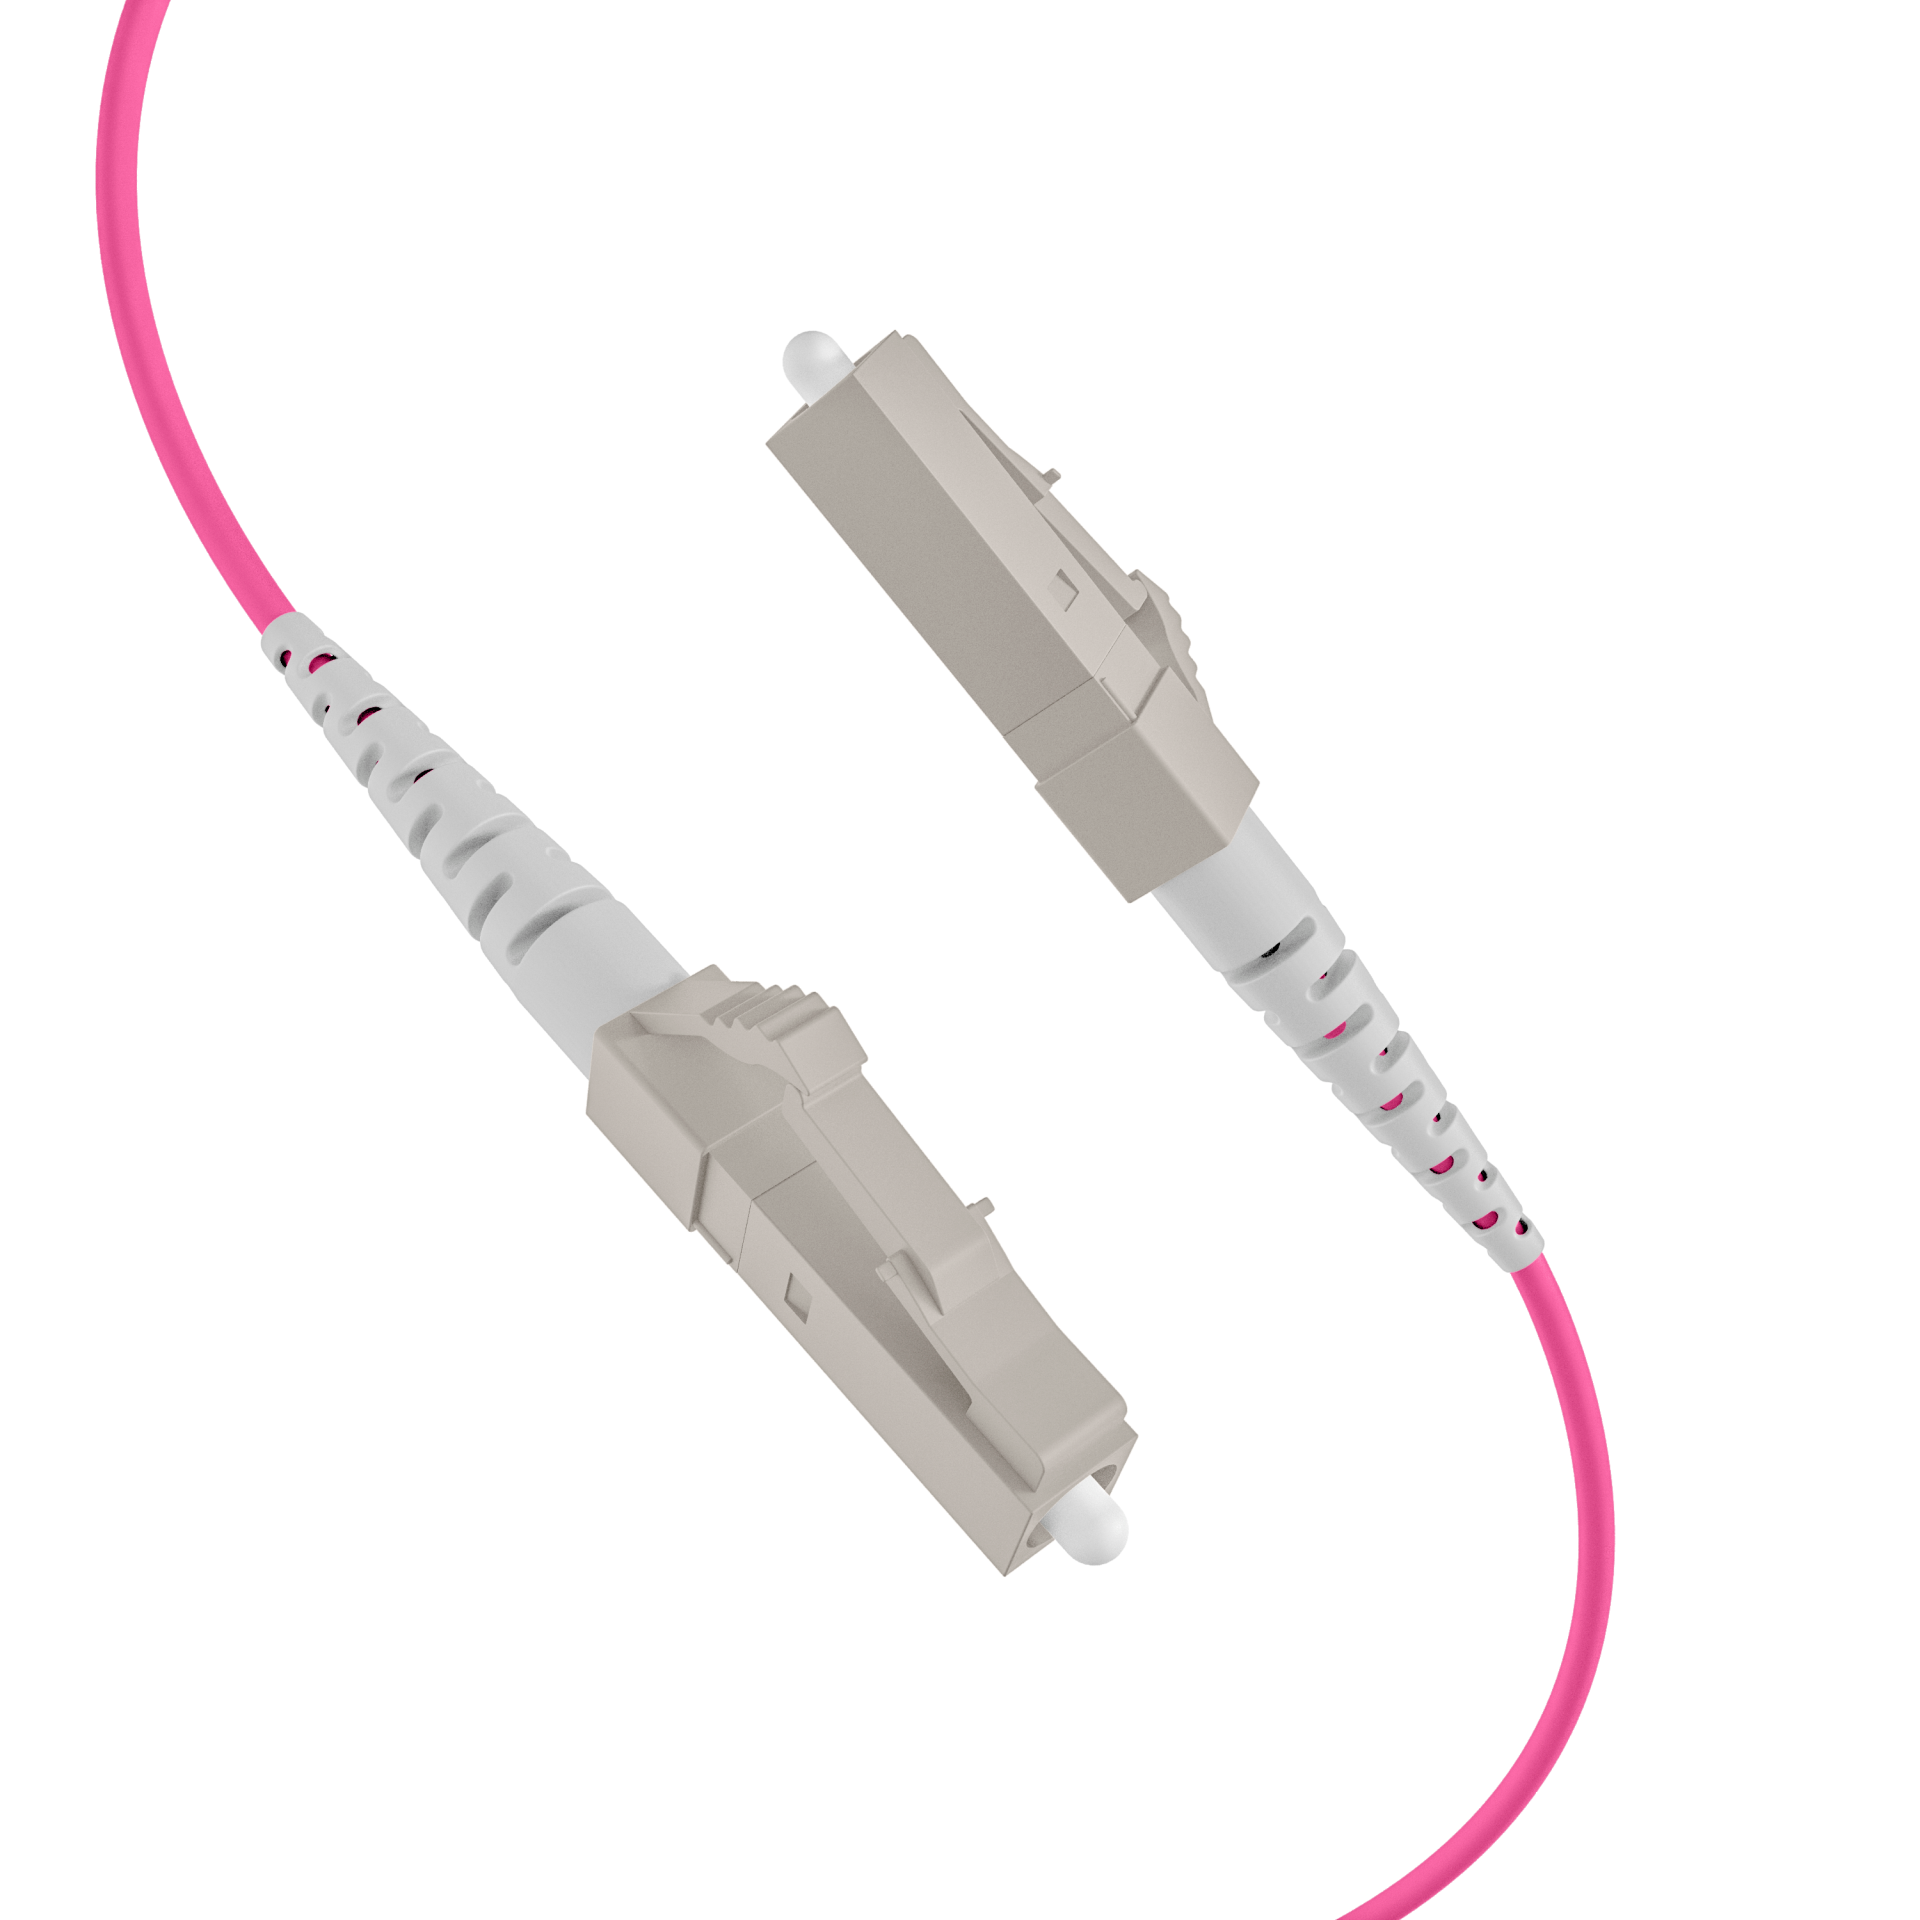 Trunkcable U-DQ(ZN)BH OM4 8G (1x8) LC-LC,40m Dca LSZH